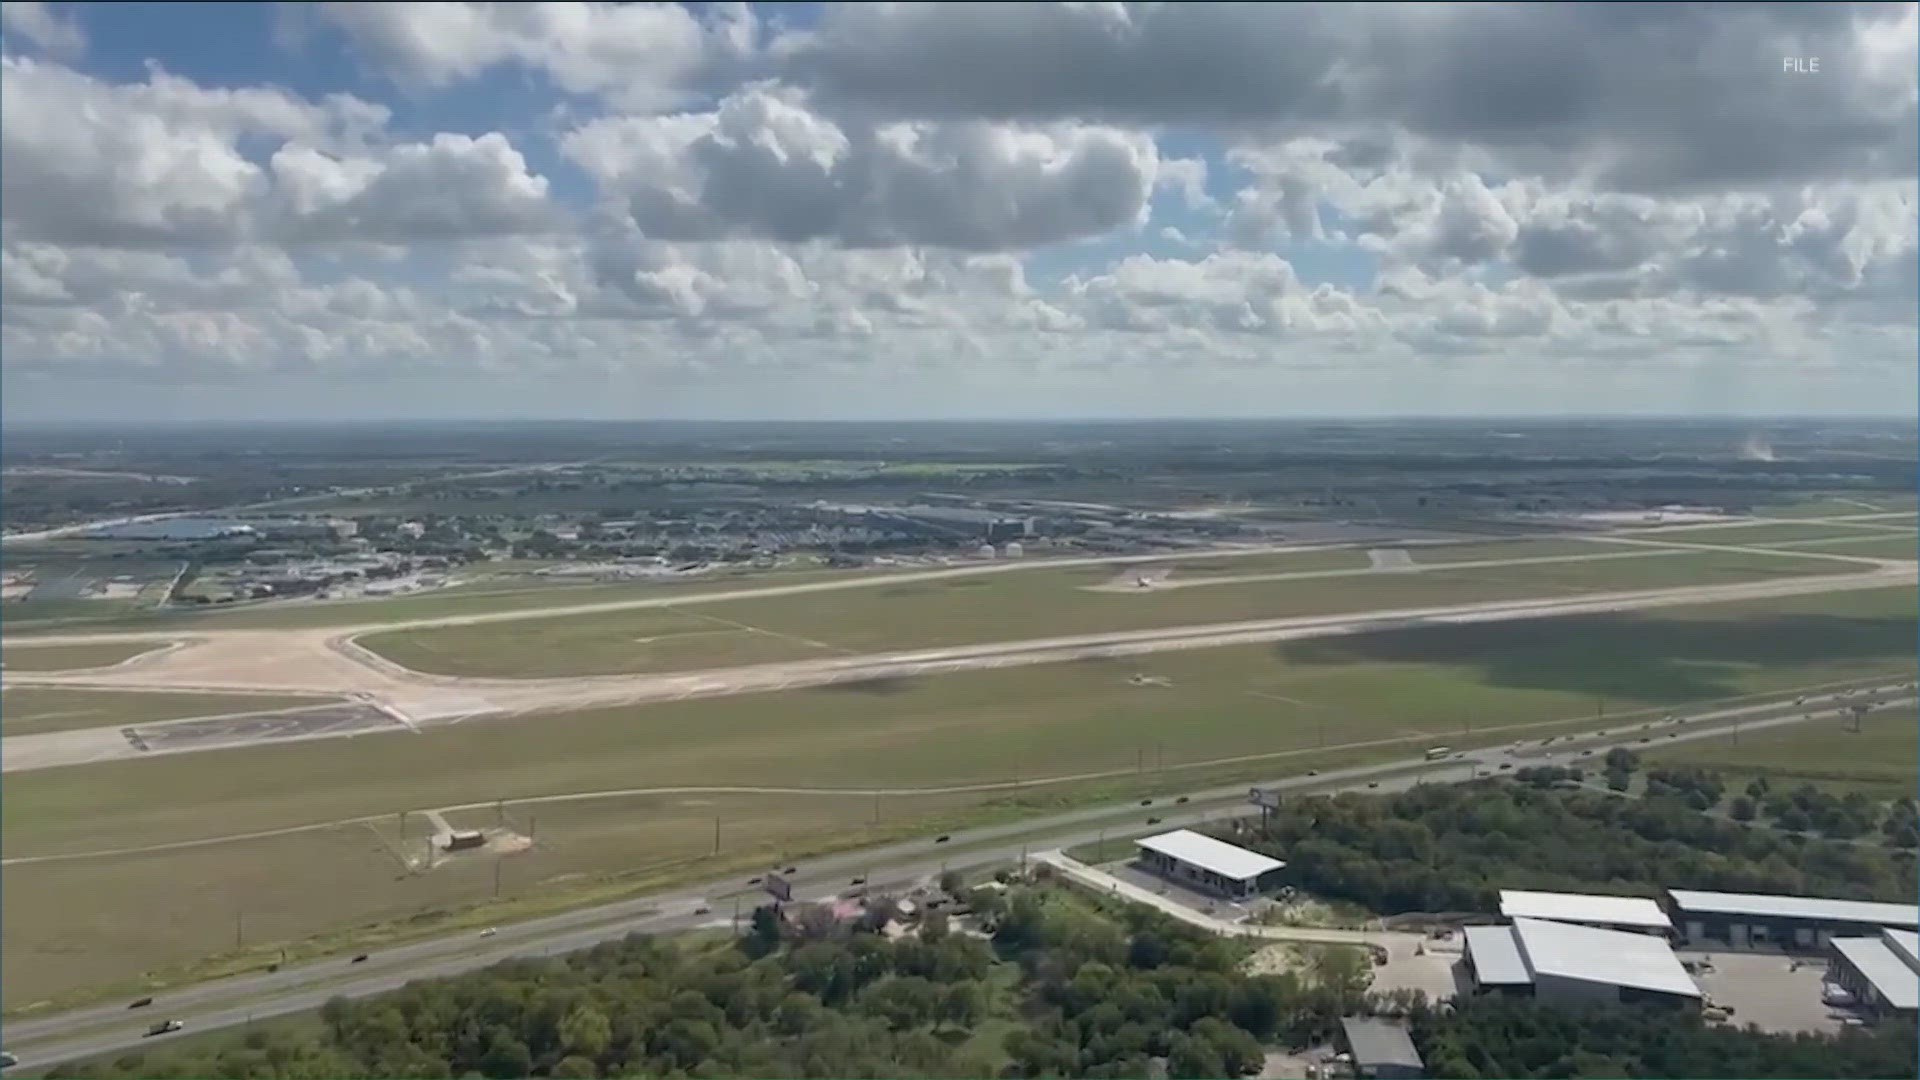 The FAA is looking into another close call at Austin's airport. This time, it involved a military plane and two civilian aircraft.